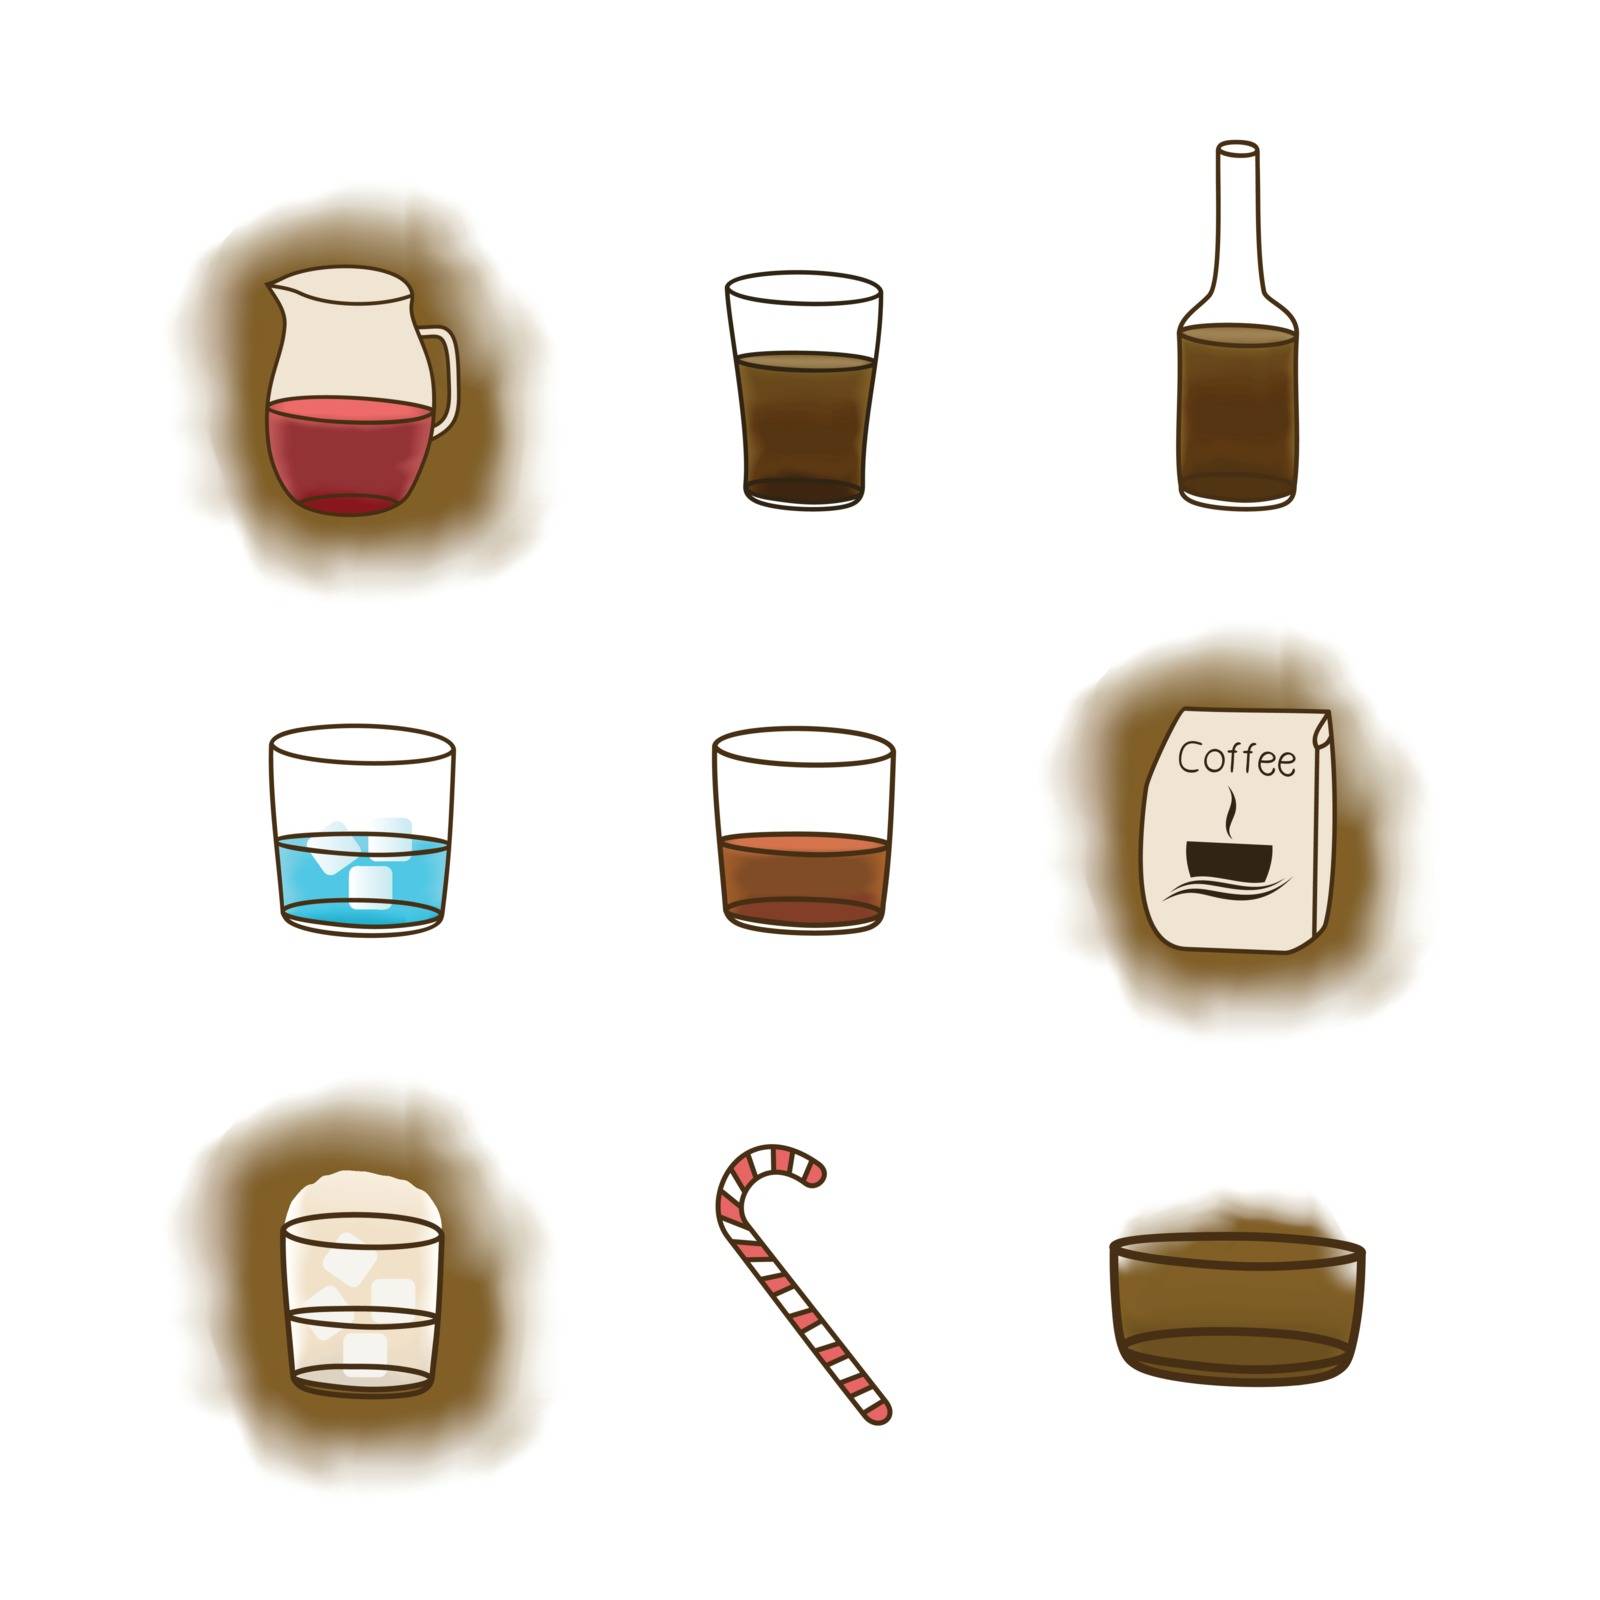 Set of icons on a coffee theme. A vector illustration